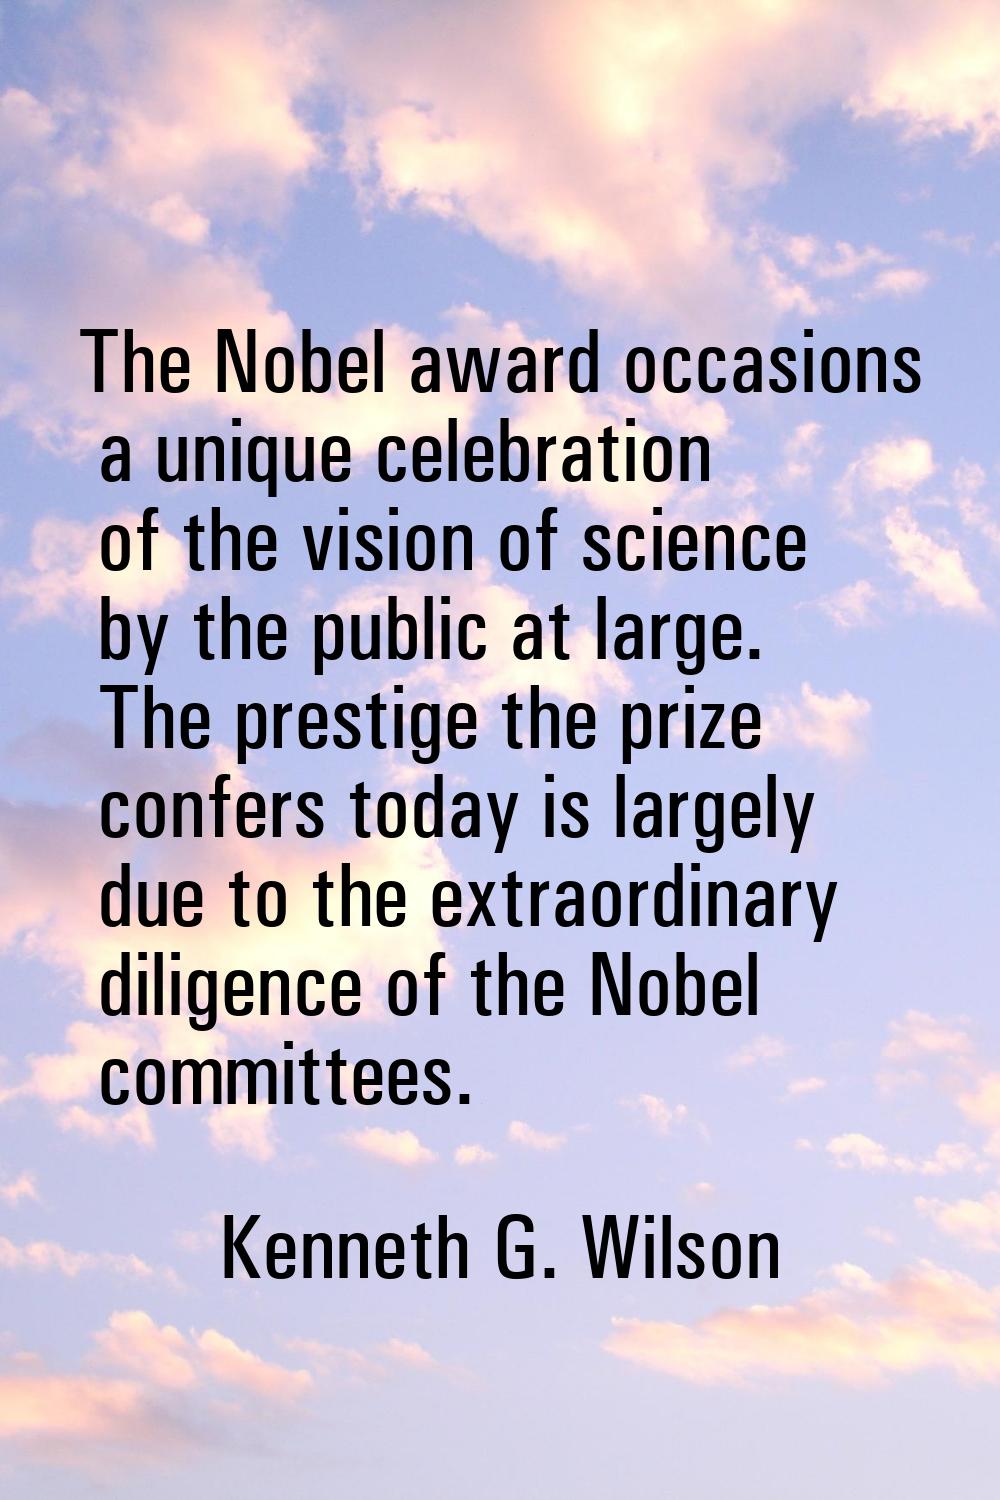 The Nobel award occasions a unique celebration of the vision of science by the public at large. The